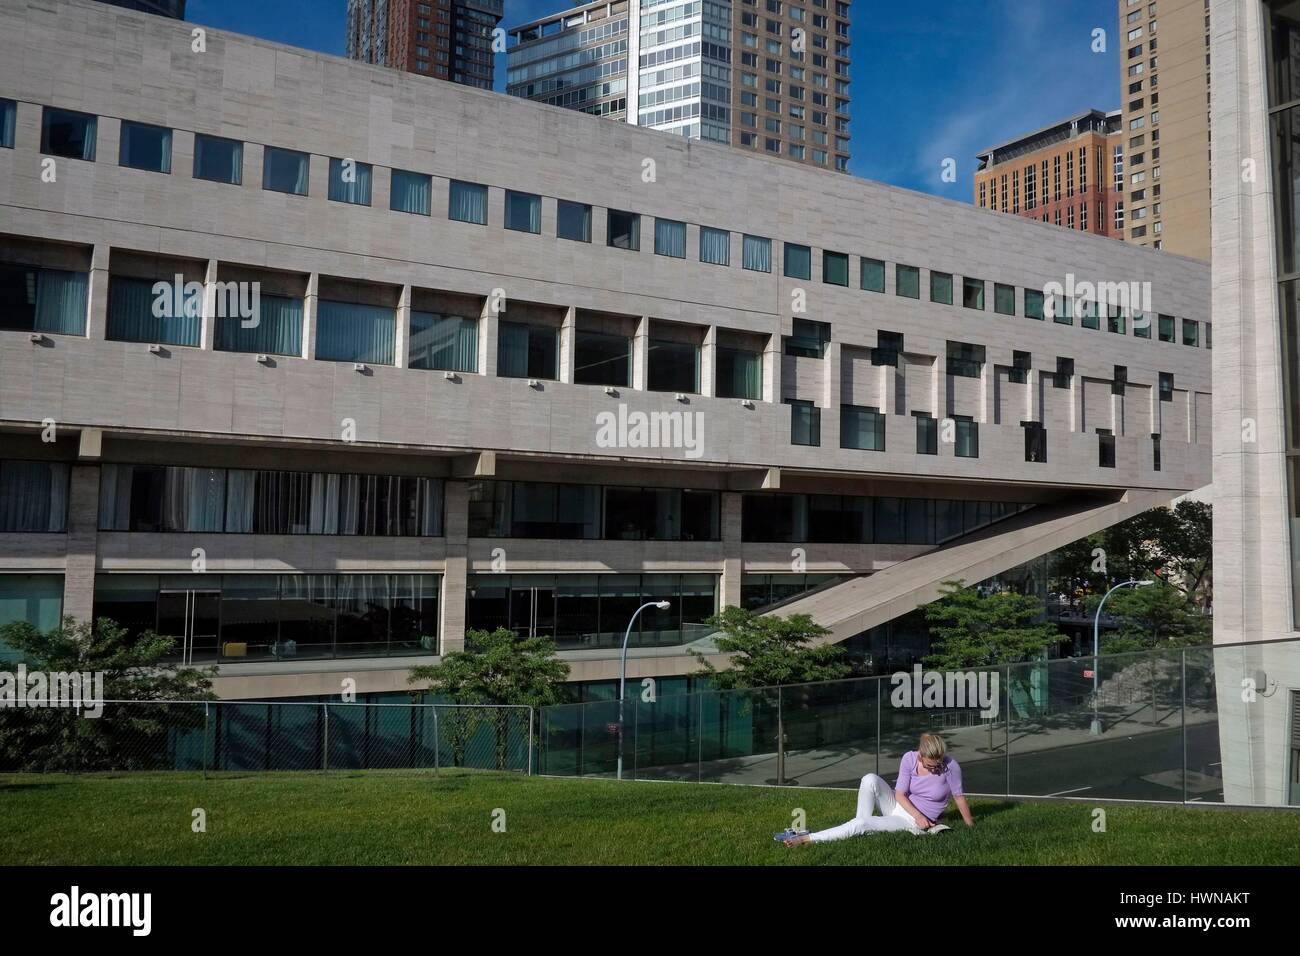 United States of America, New York, Manhattan, Lincoln Center for the Performing Arts right in the picture and in the background the Juilliard School, a conservatory of music, Stock Photo